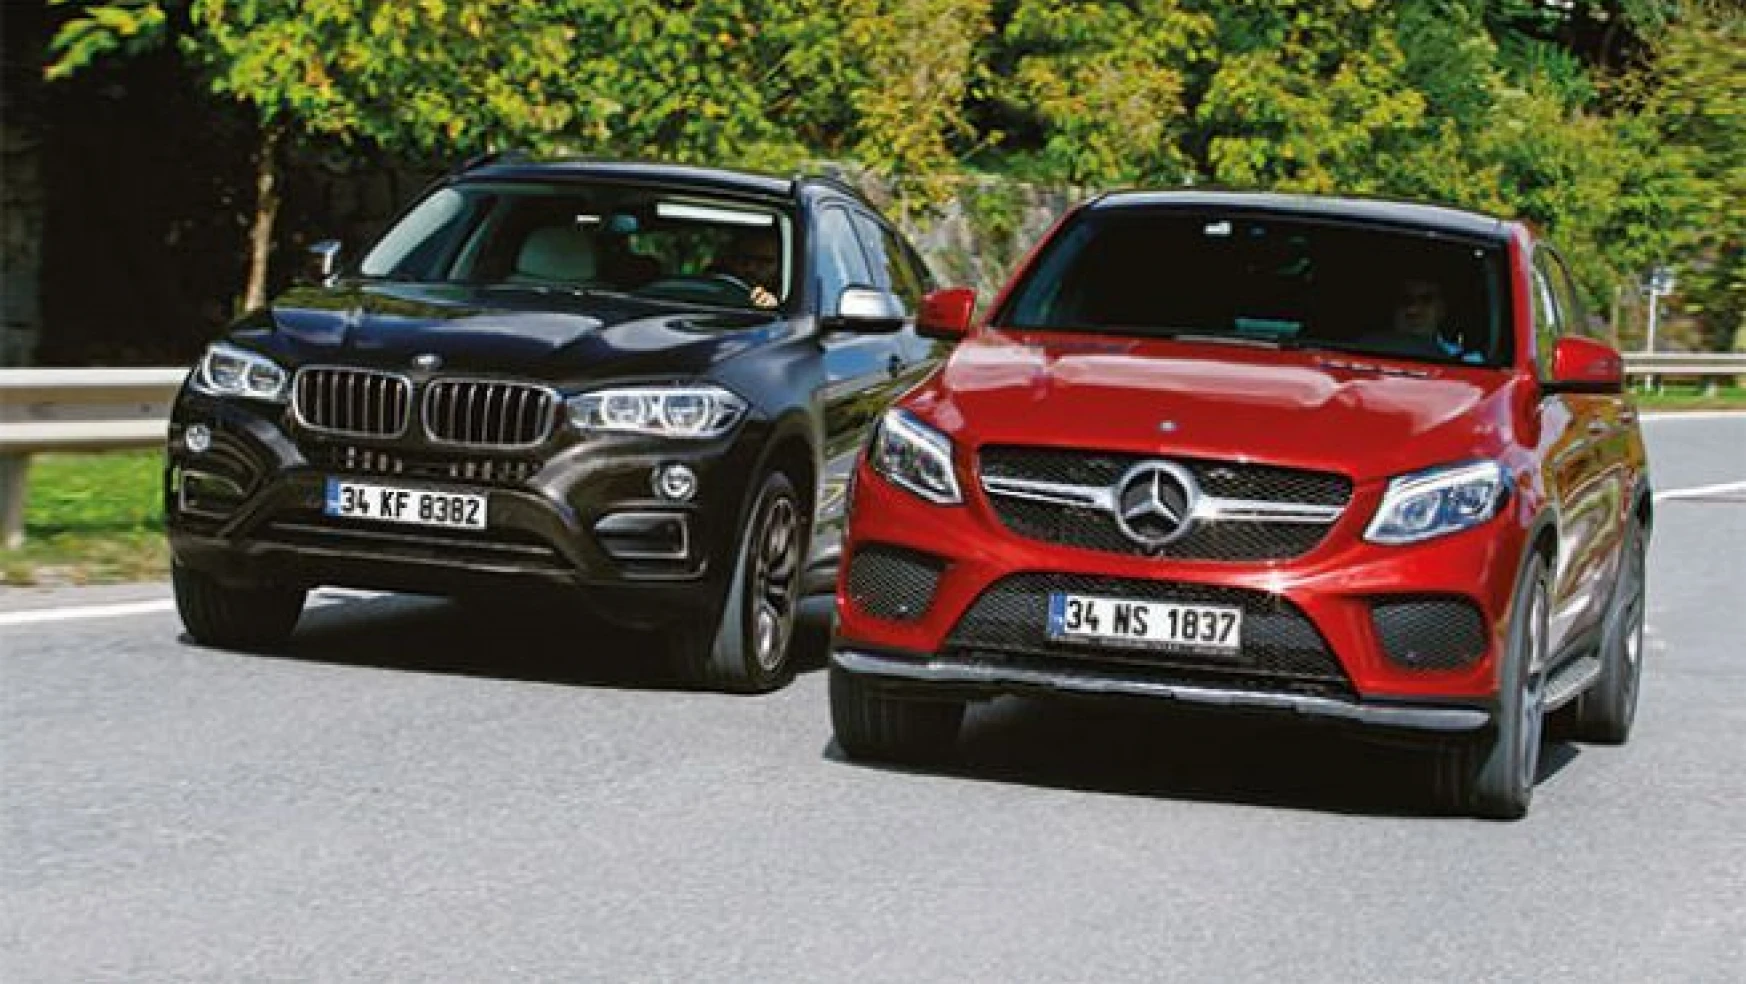 BMW X6, Mercedes GLE Coupe